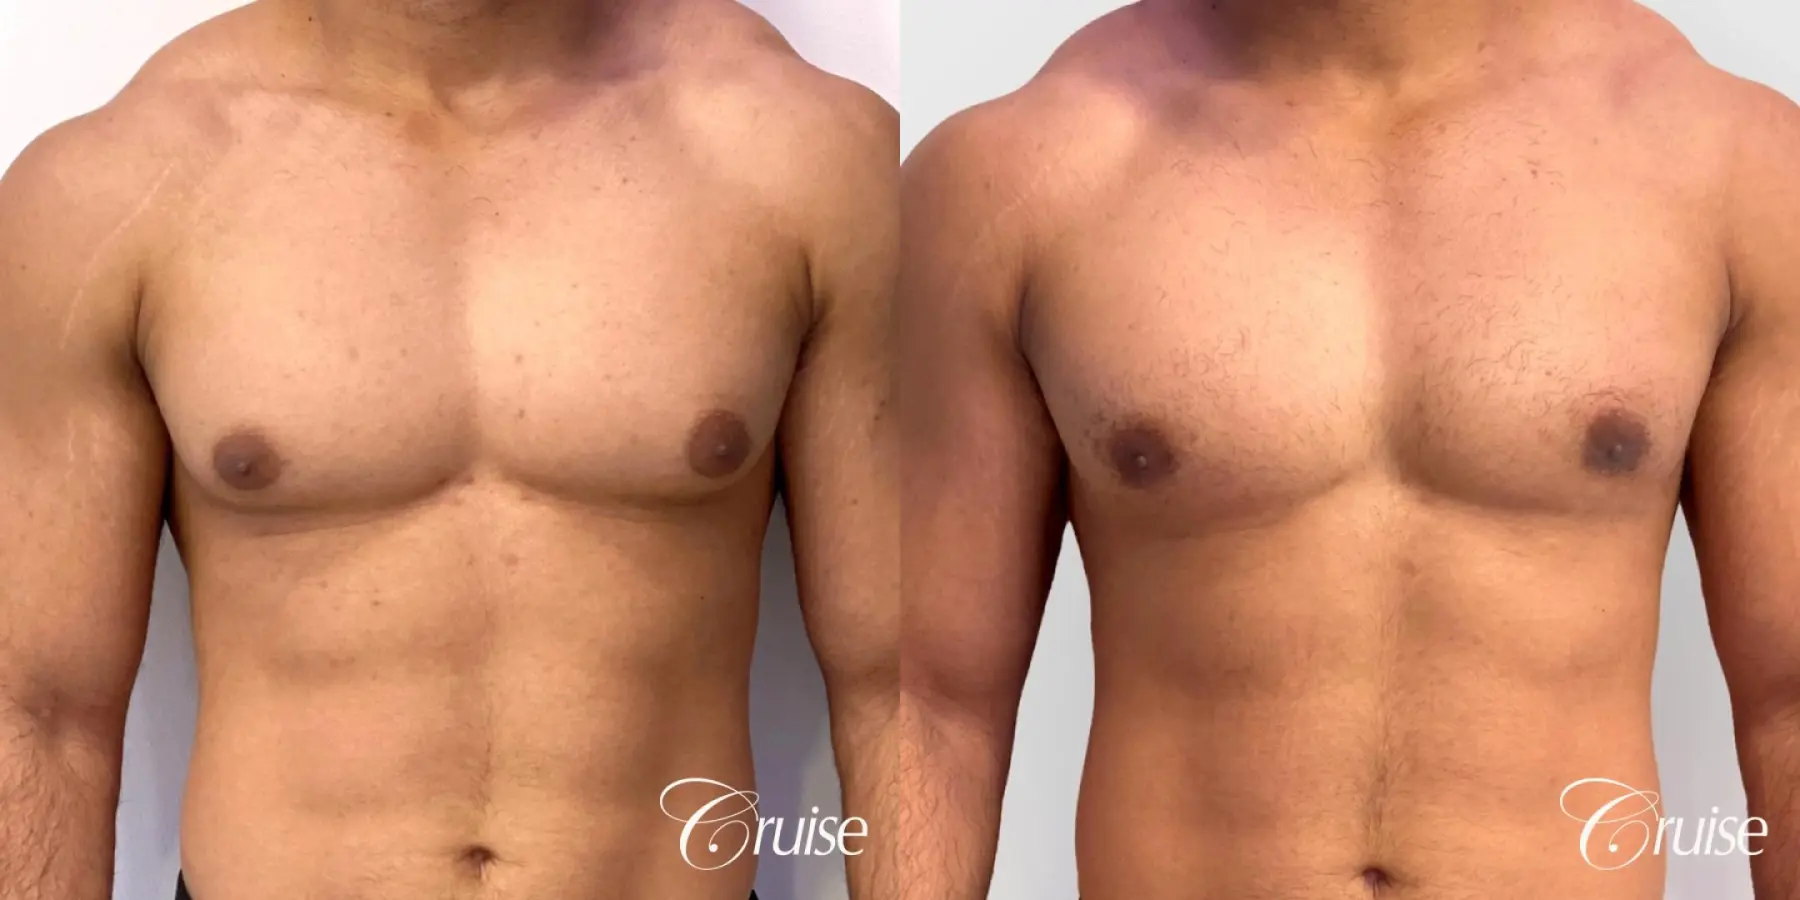 Type 1 Gynecomastia with Puffy Nipples - Before and After